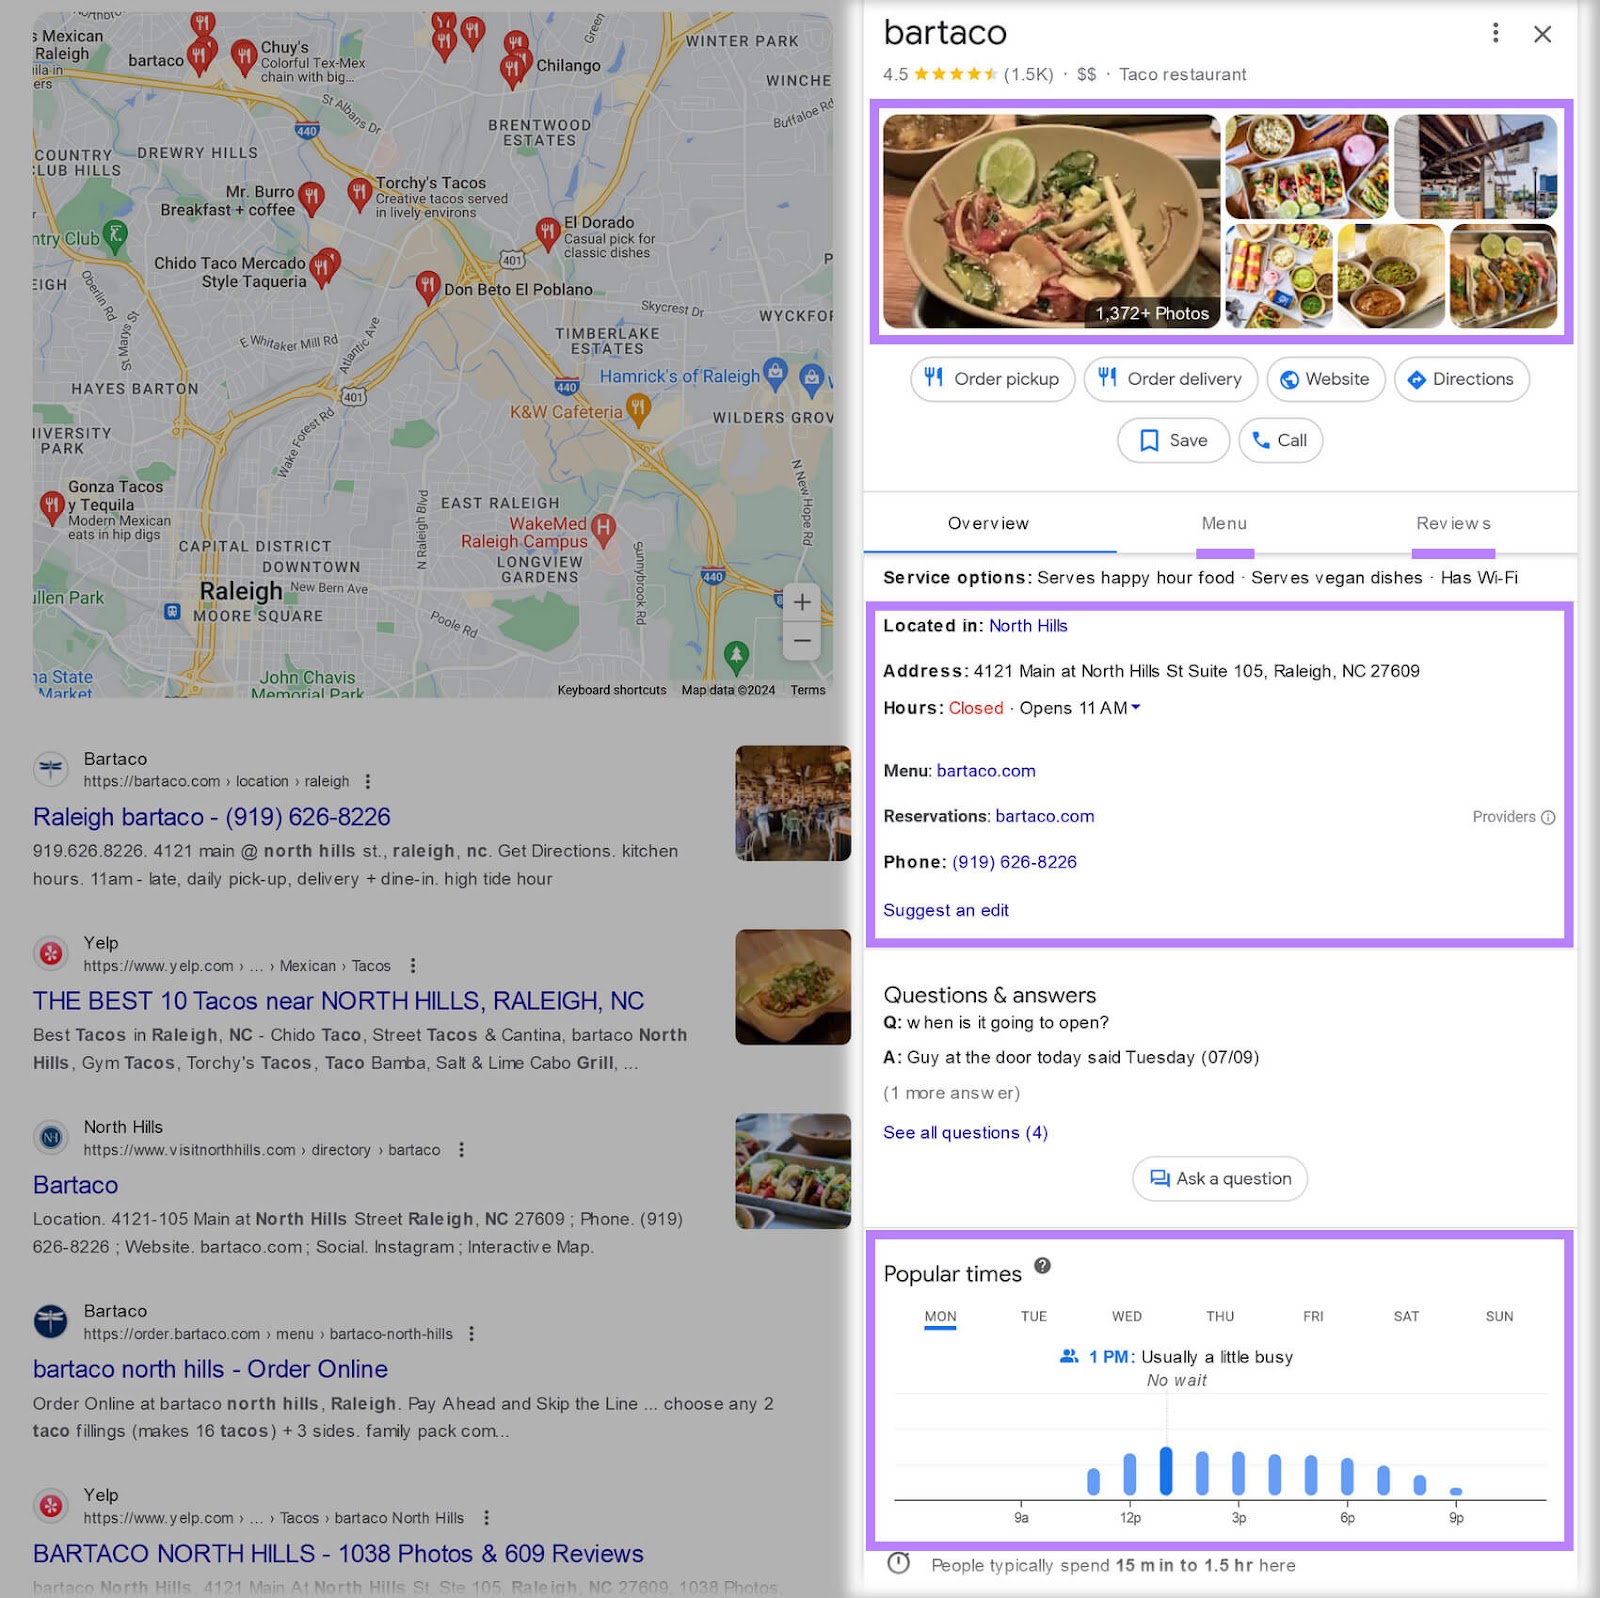 bartaco's business listing result on Google's SERP